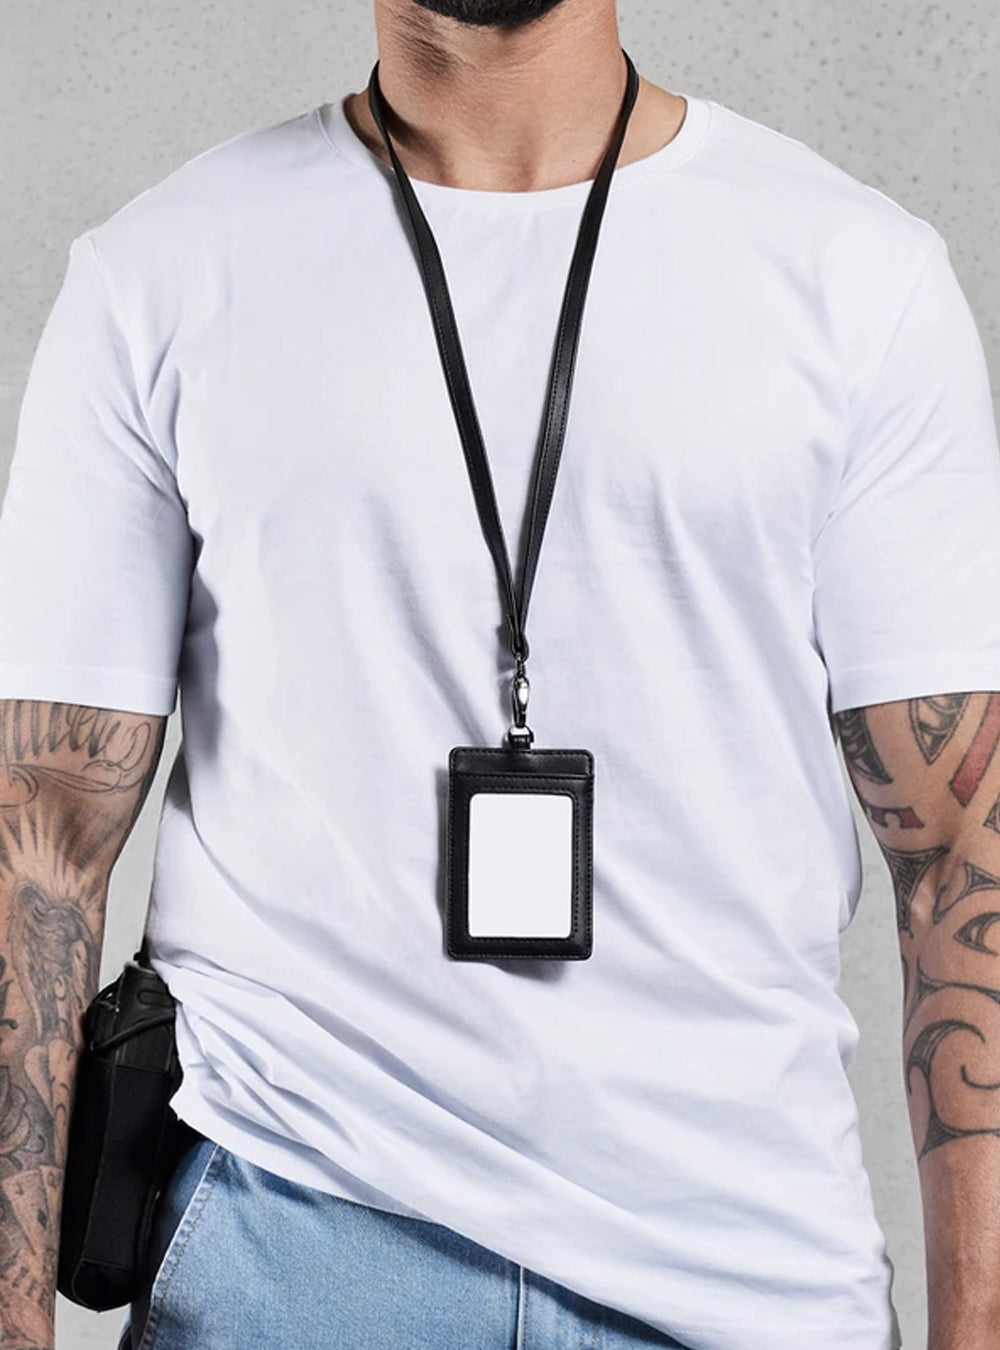 SALE - CVRT Tactical Minimalist ID Holder - Recycled Leather - TacSource